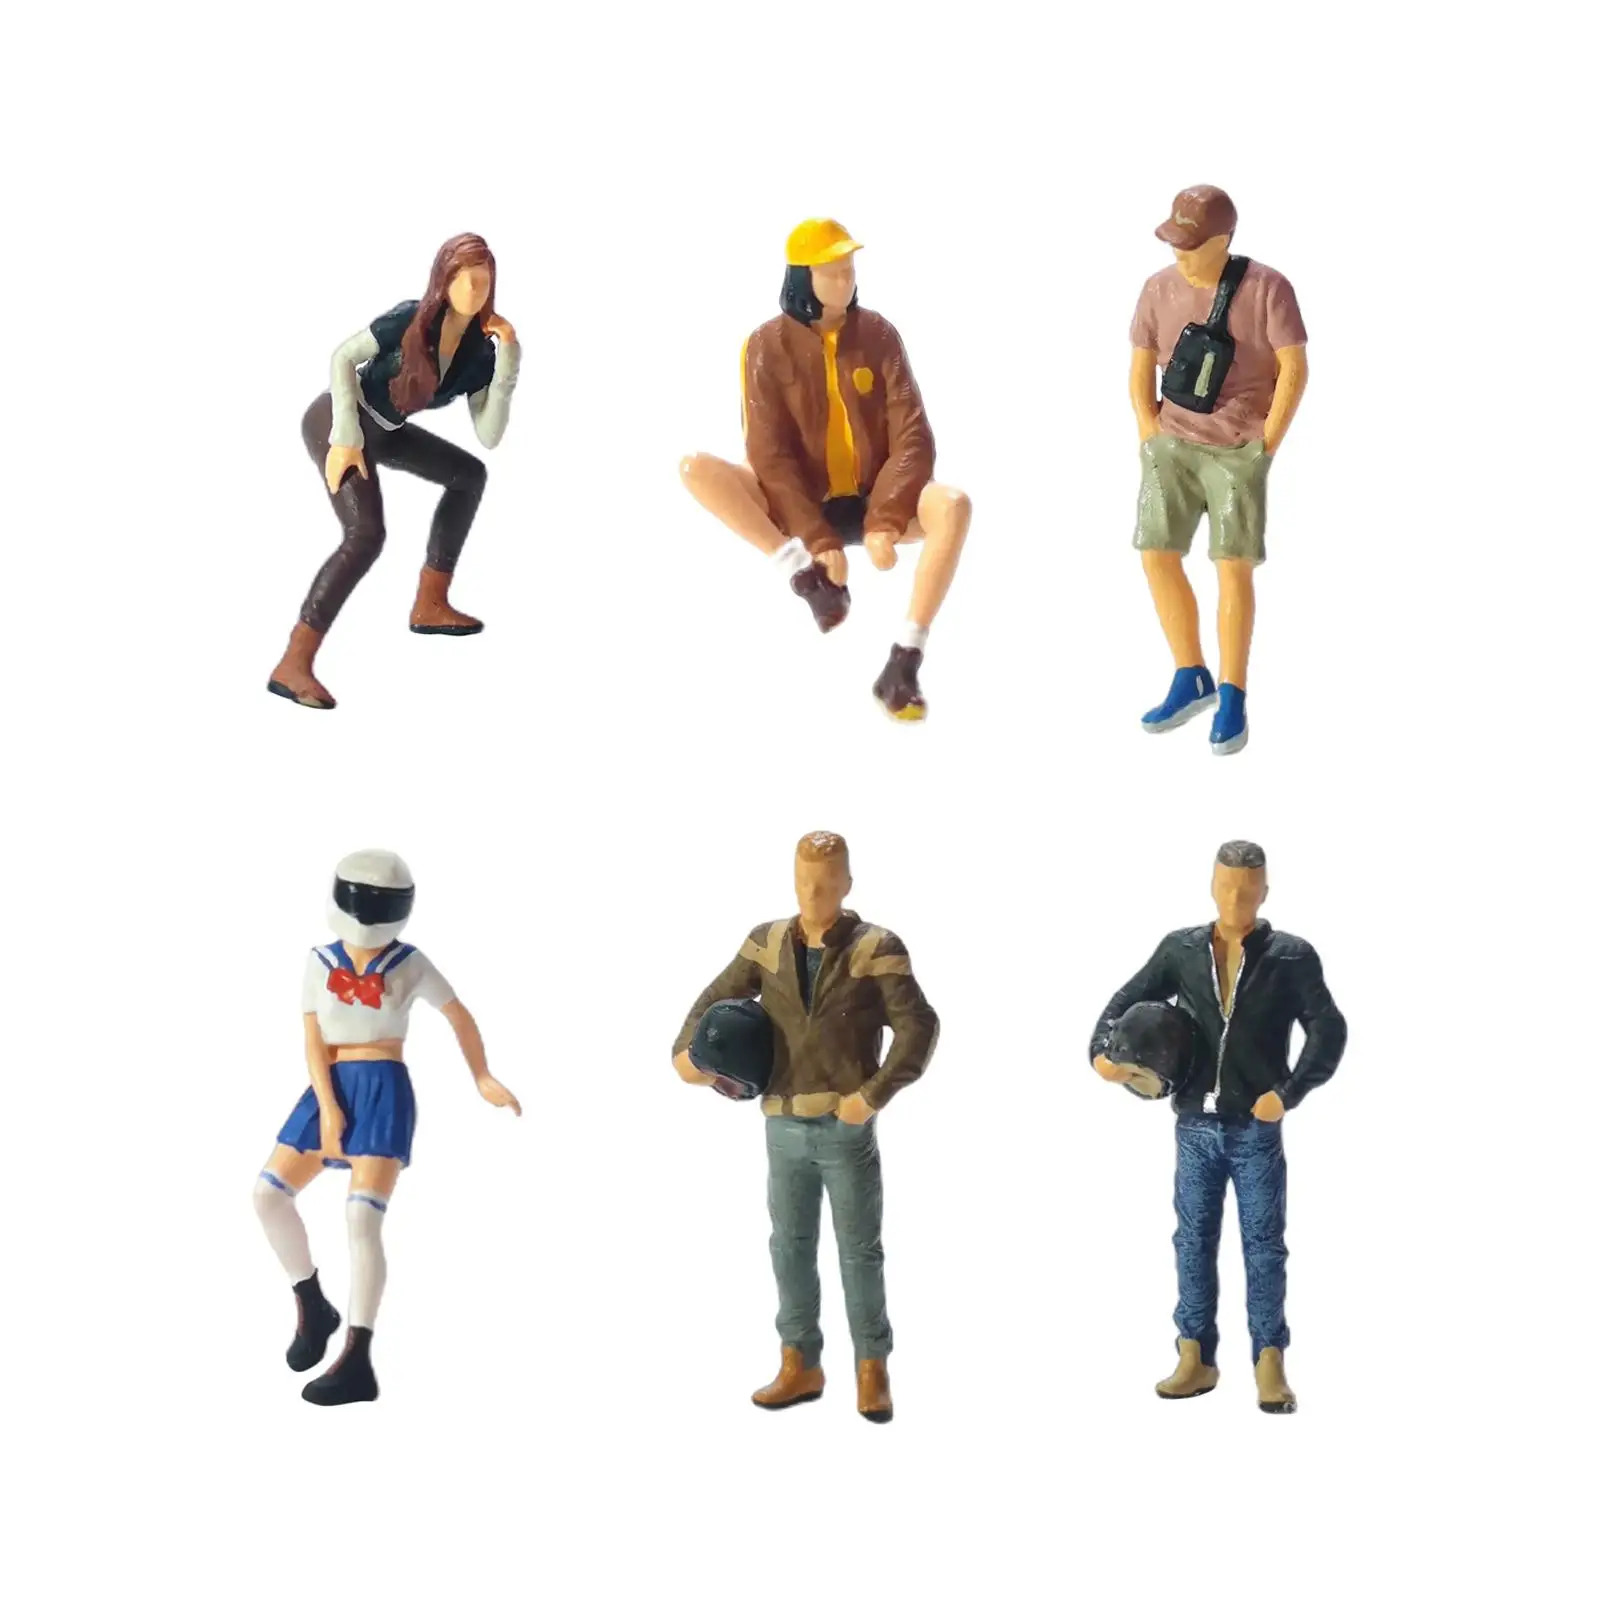 1/64 Figures Model Ornament Tiny People 1/64 Scale Model Figures Miniature Model Figures Miniature Scenes Decor Diorama Layout